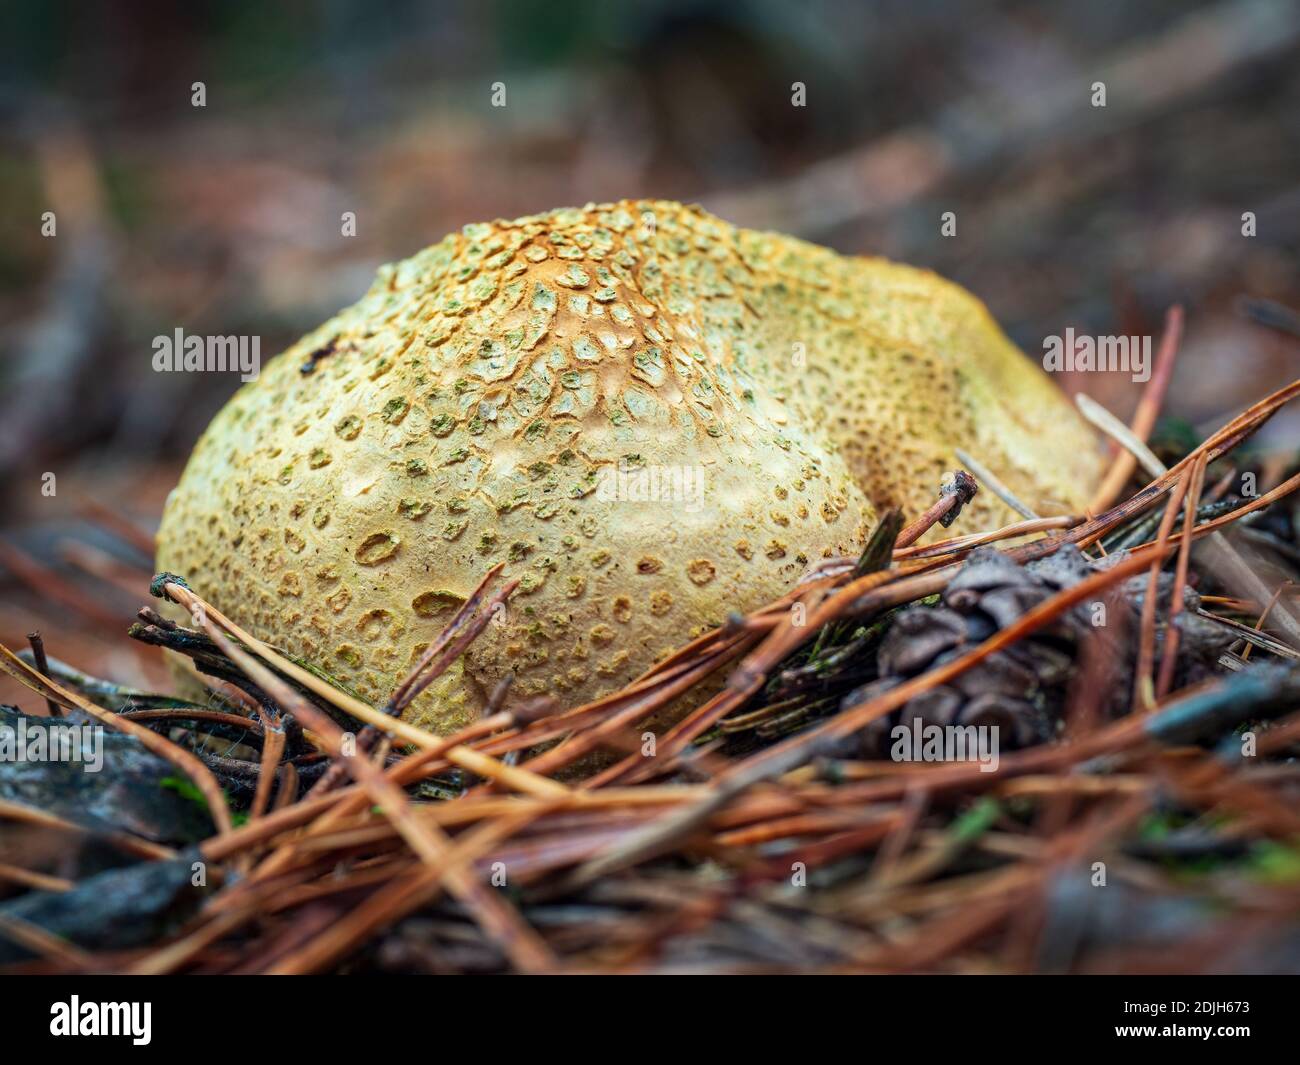 Close-up of common earthball wild mushroom called common earthball, pigskin poison puffball, or common earth ball. Scleroderma citrinum. Outer walls o Stock Photo